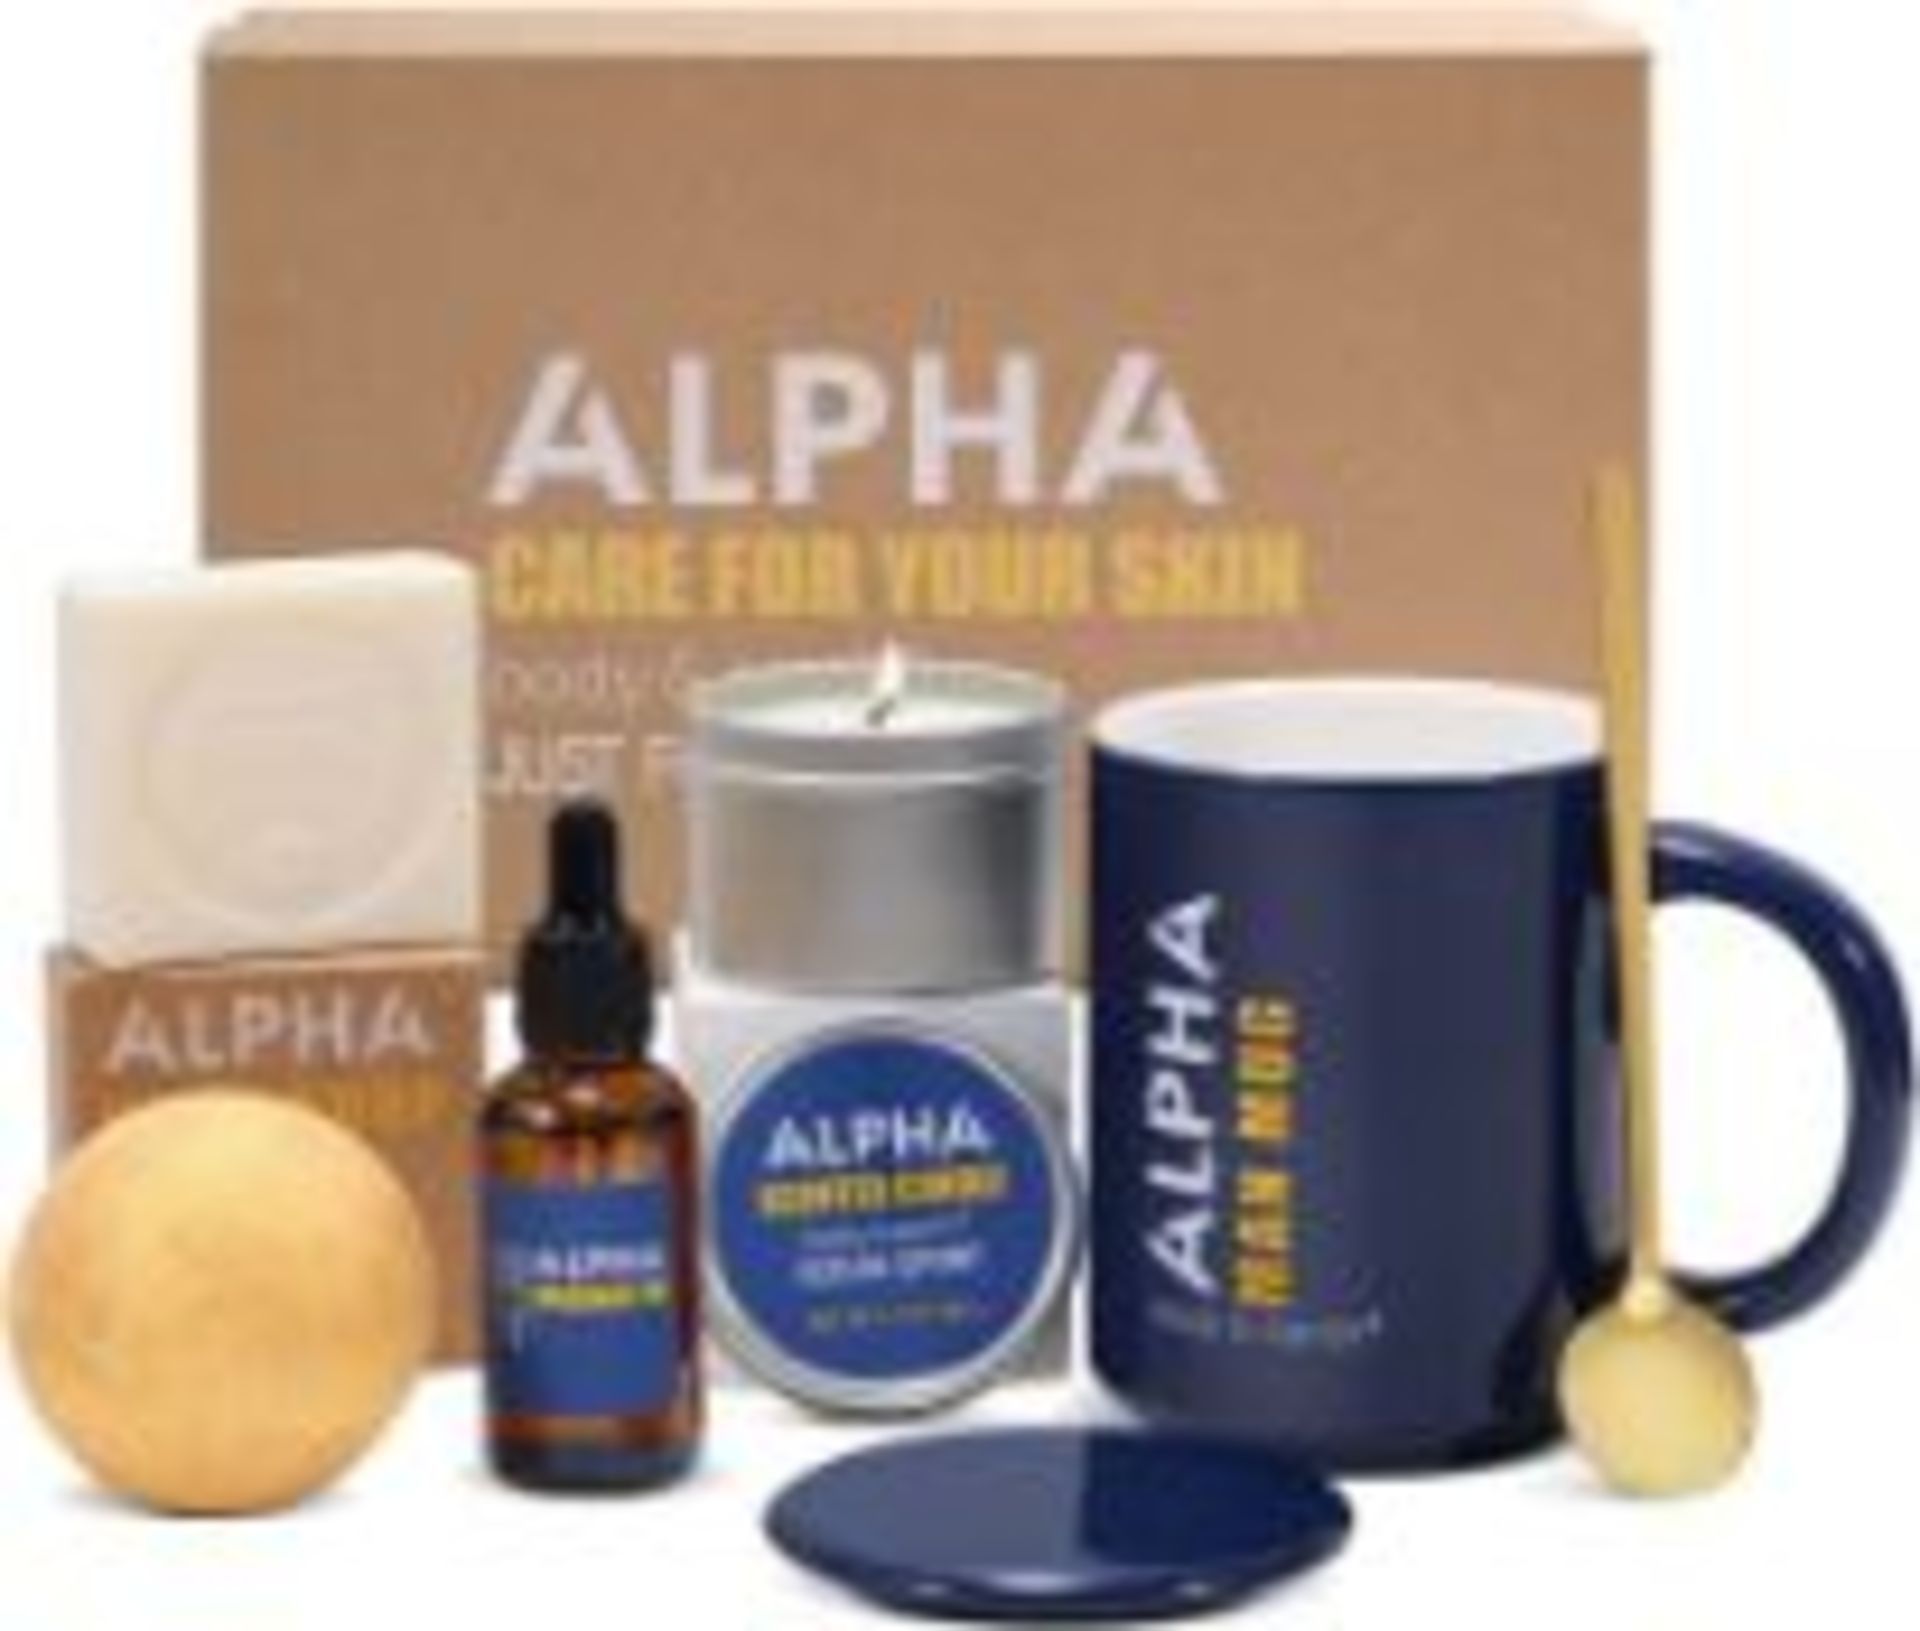 6 X NEW PACKAGED Alpha - Care For Your Skin - Body & Earth. Just For You 6 Piece Gift Sets (SKU:BE-